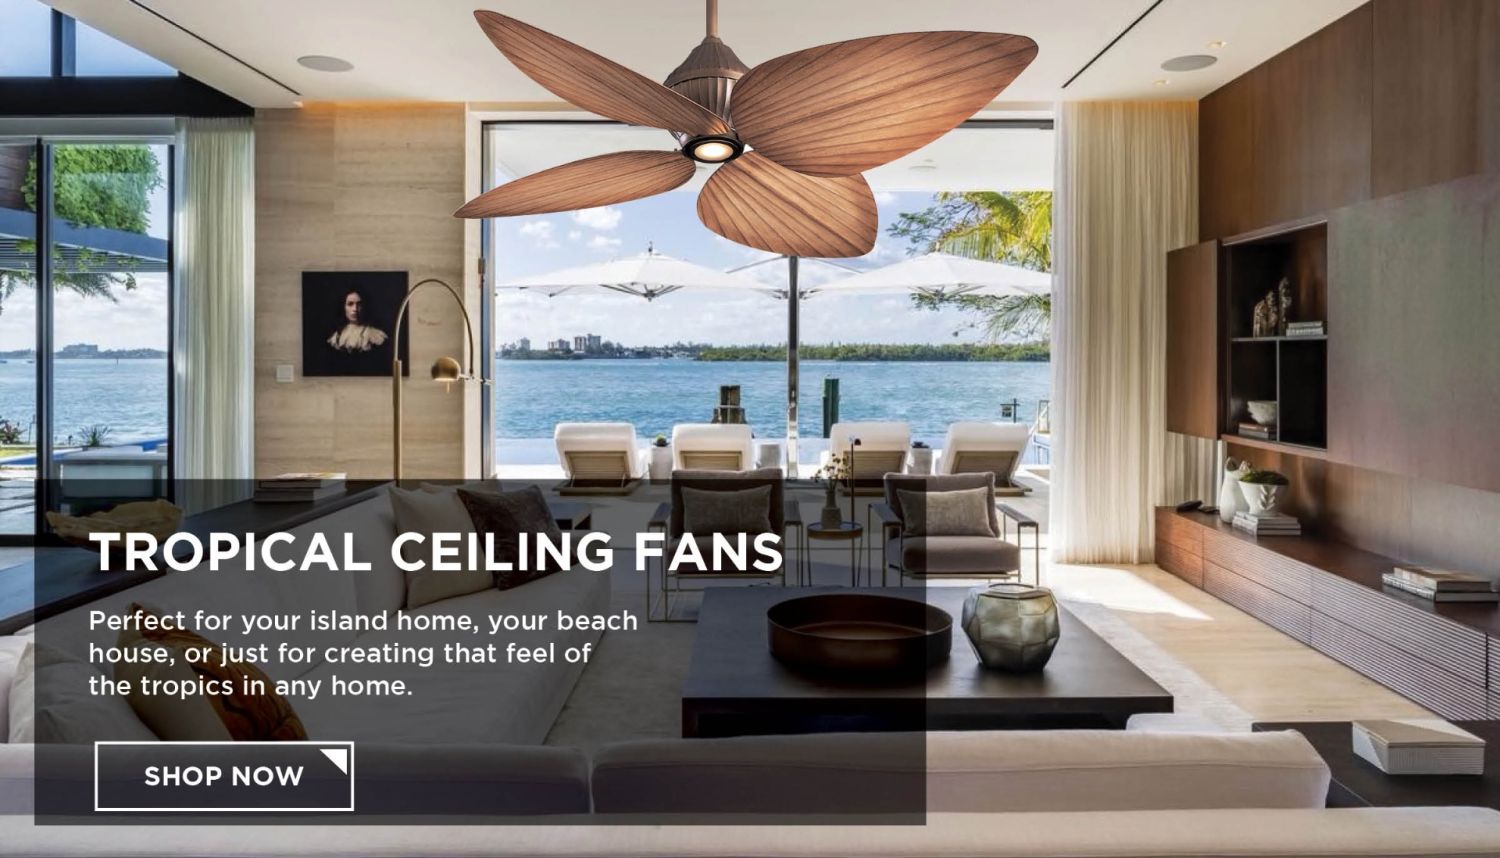 /designer-ceiling-fans/tropical-ceiling-fans-palm-bamboo.html